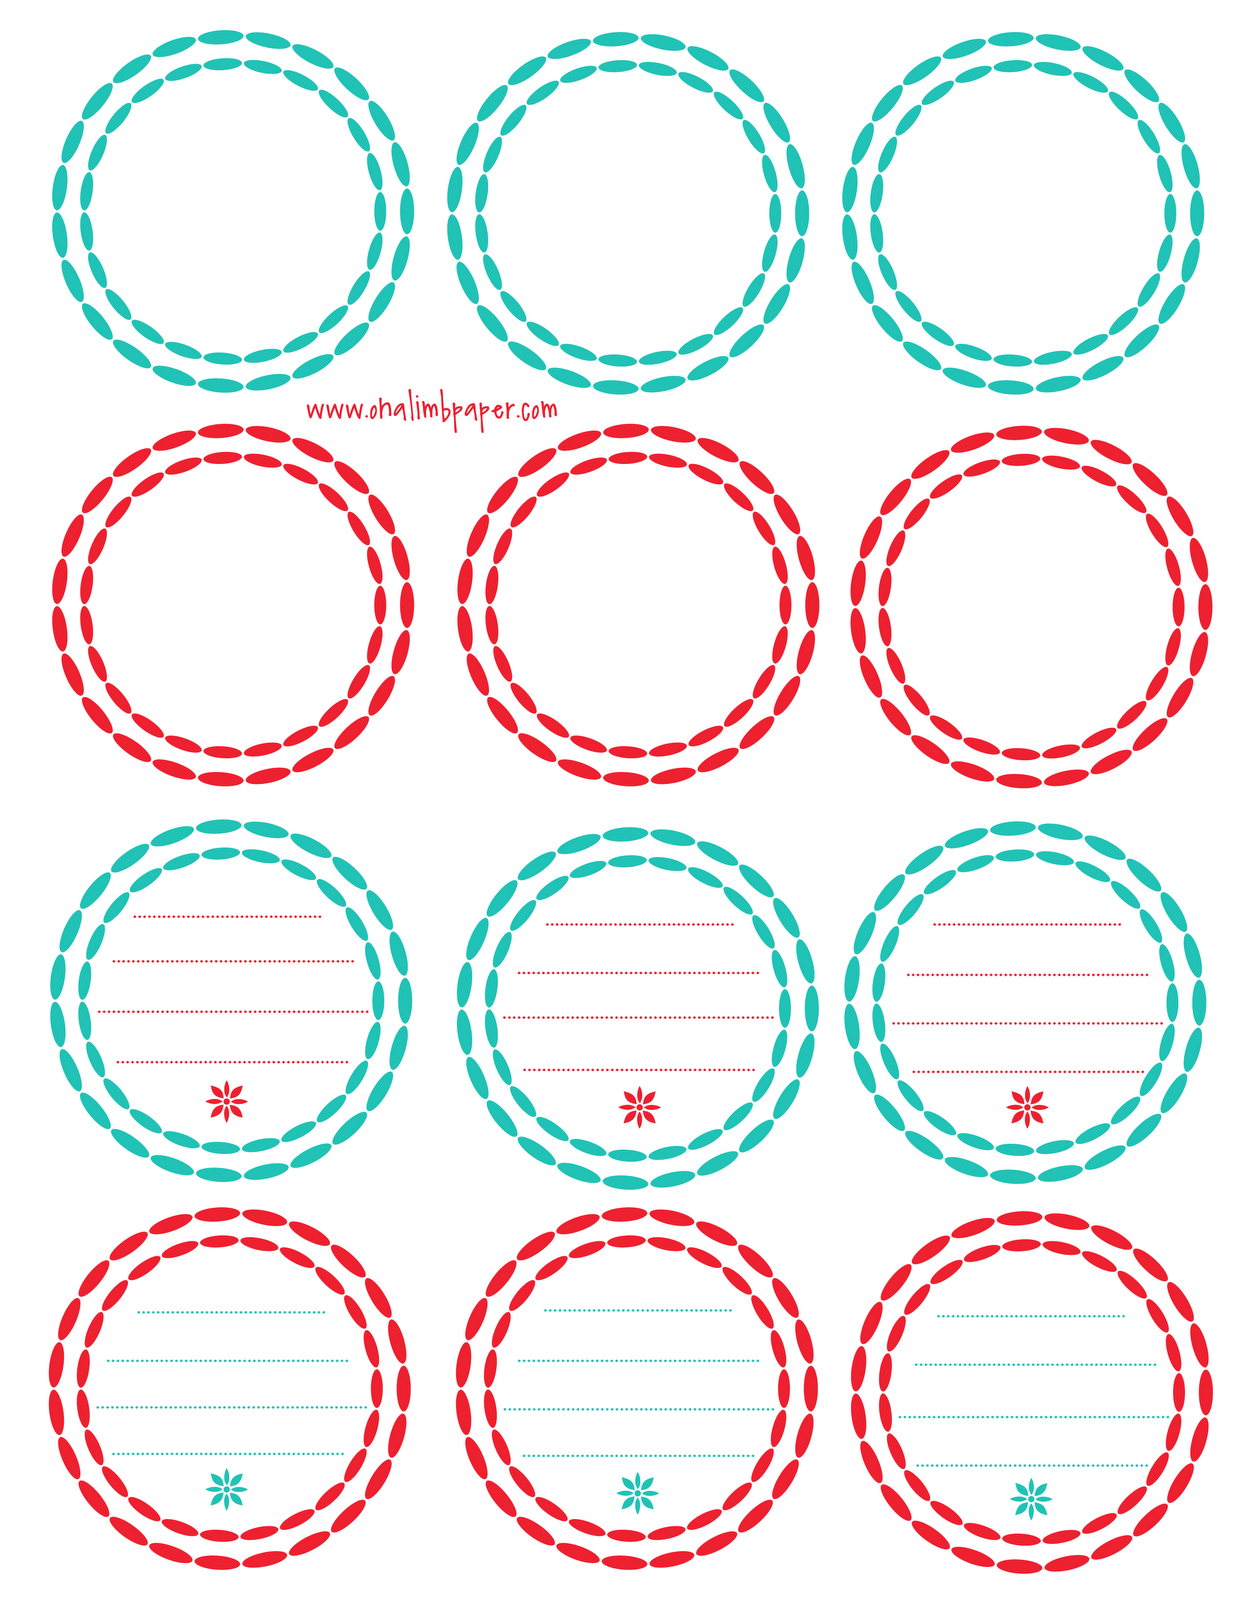 5162-label-template-free-avery-clipart-clipground-you-can-find